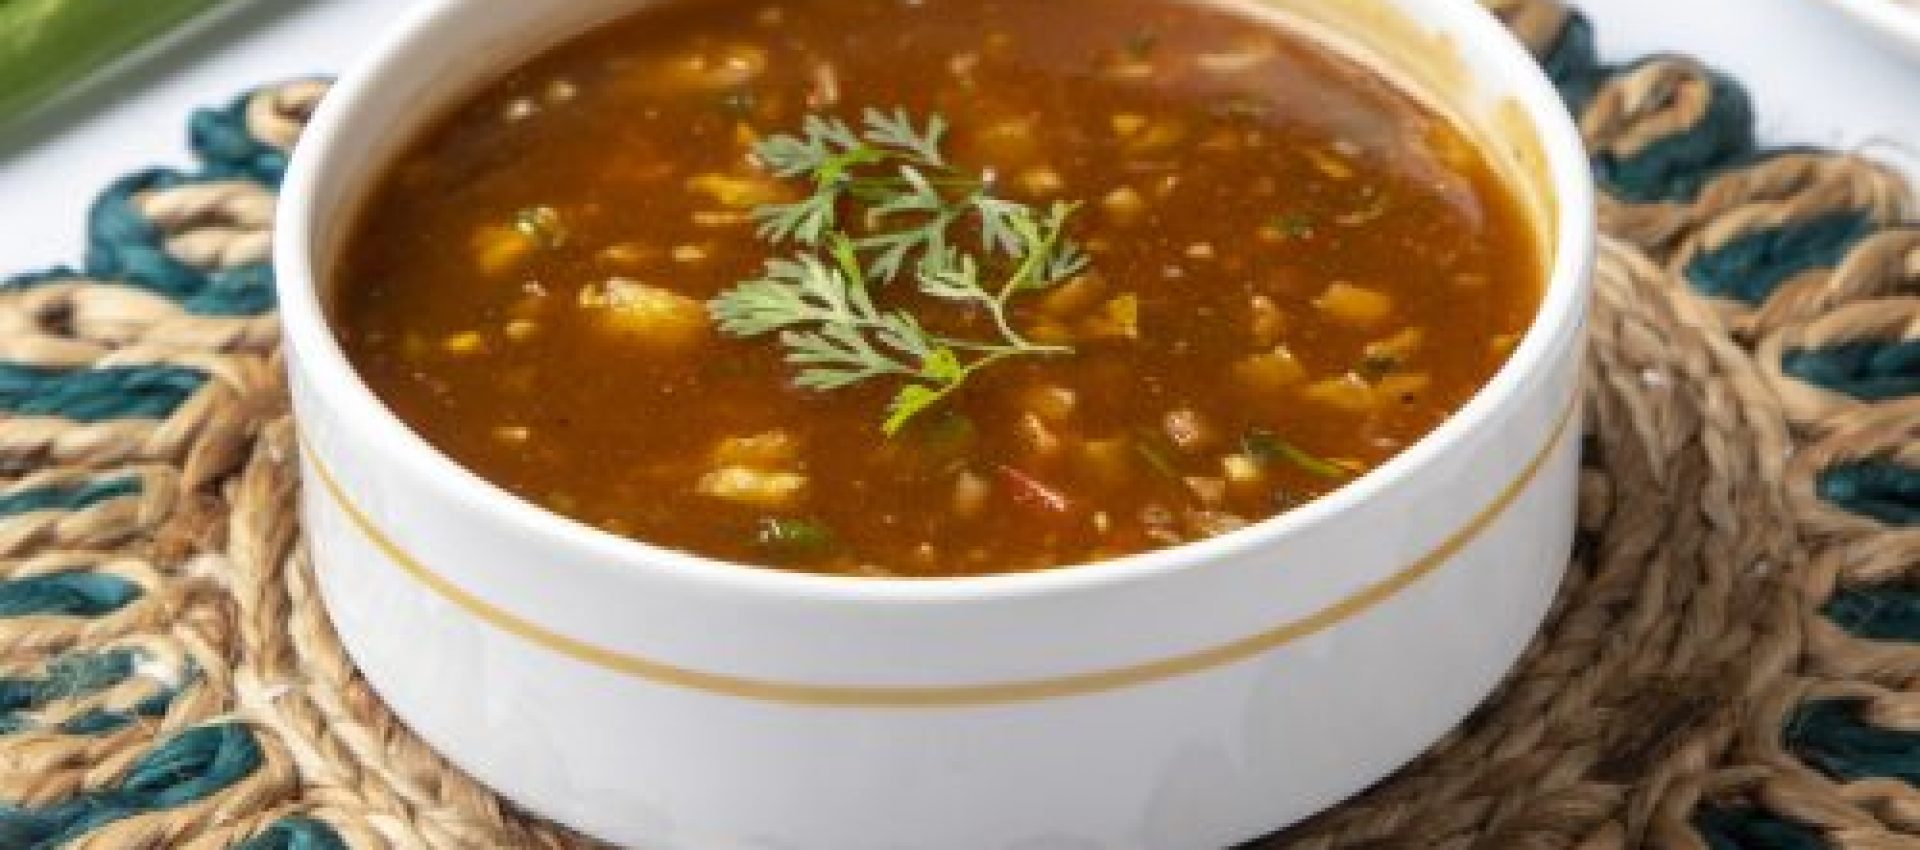 Turkish Soup with Species: Dish of the Week